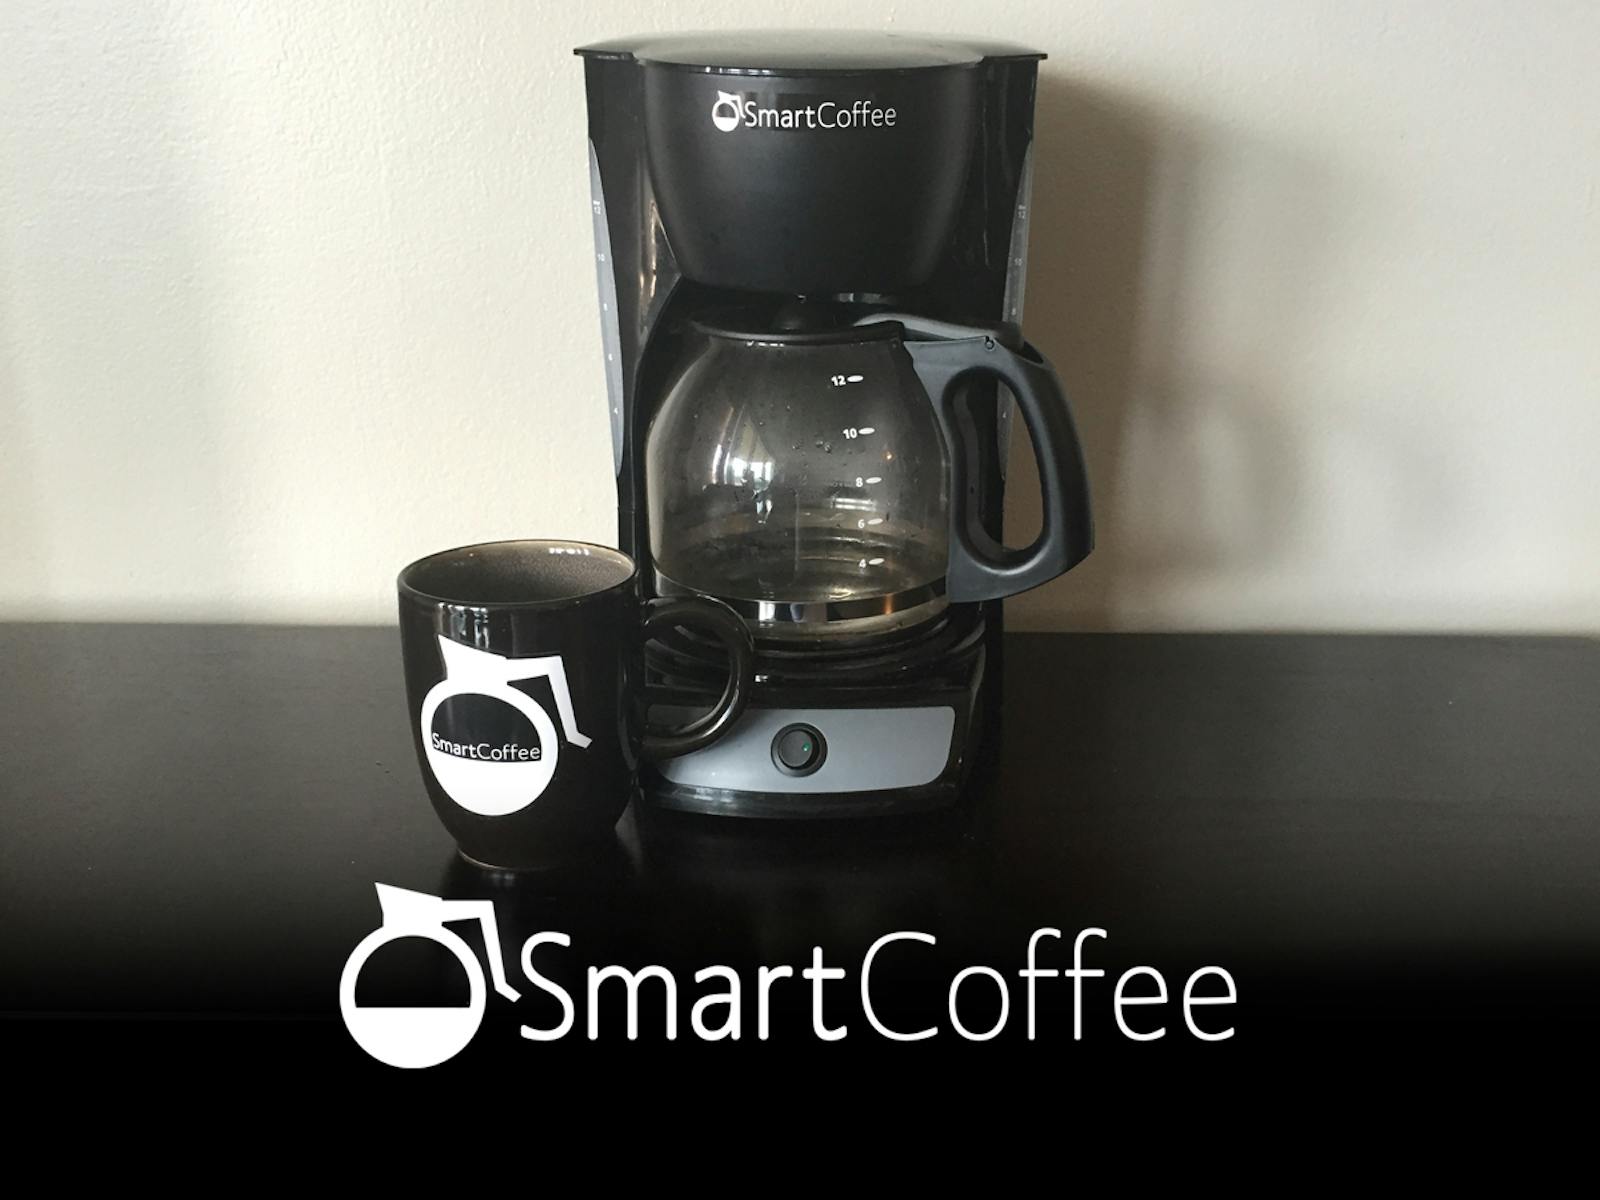 Mr. Coffee Smart Coffeemaker Enabled by WeMo Overview 